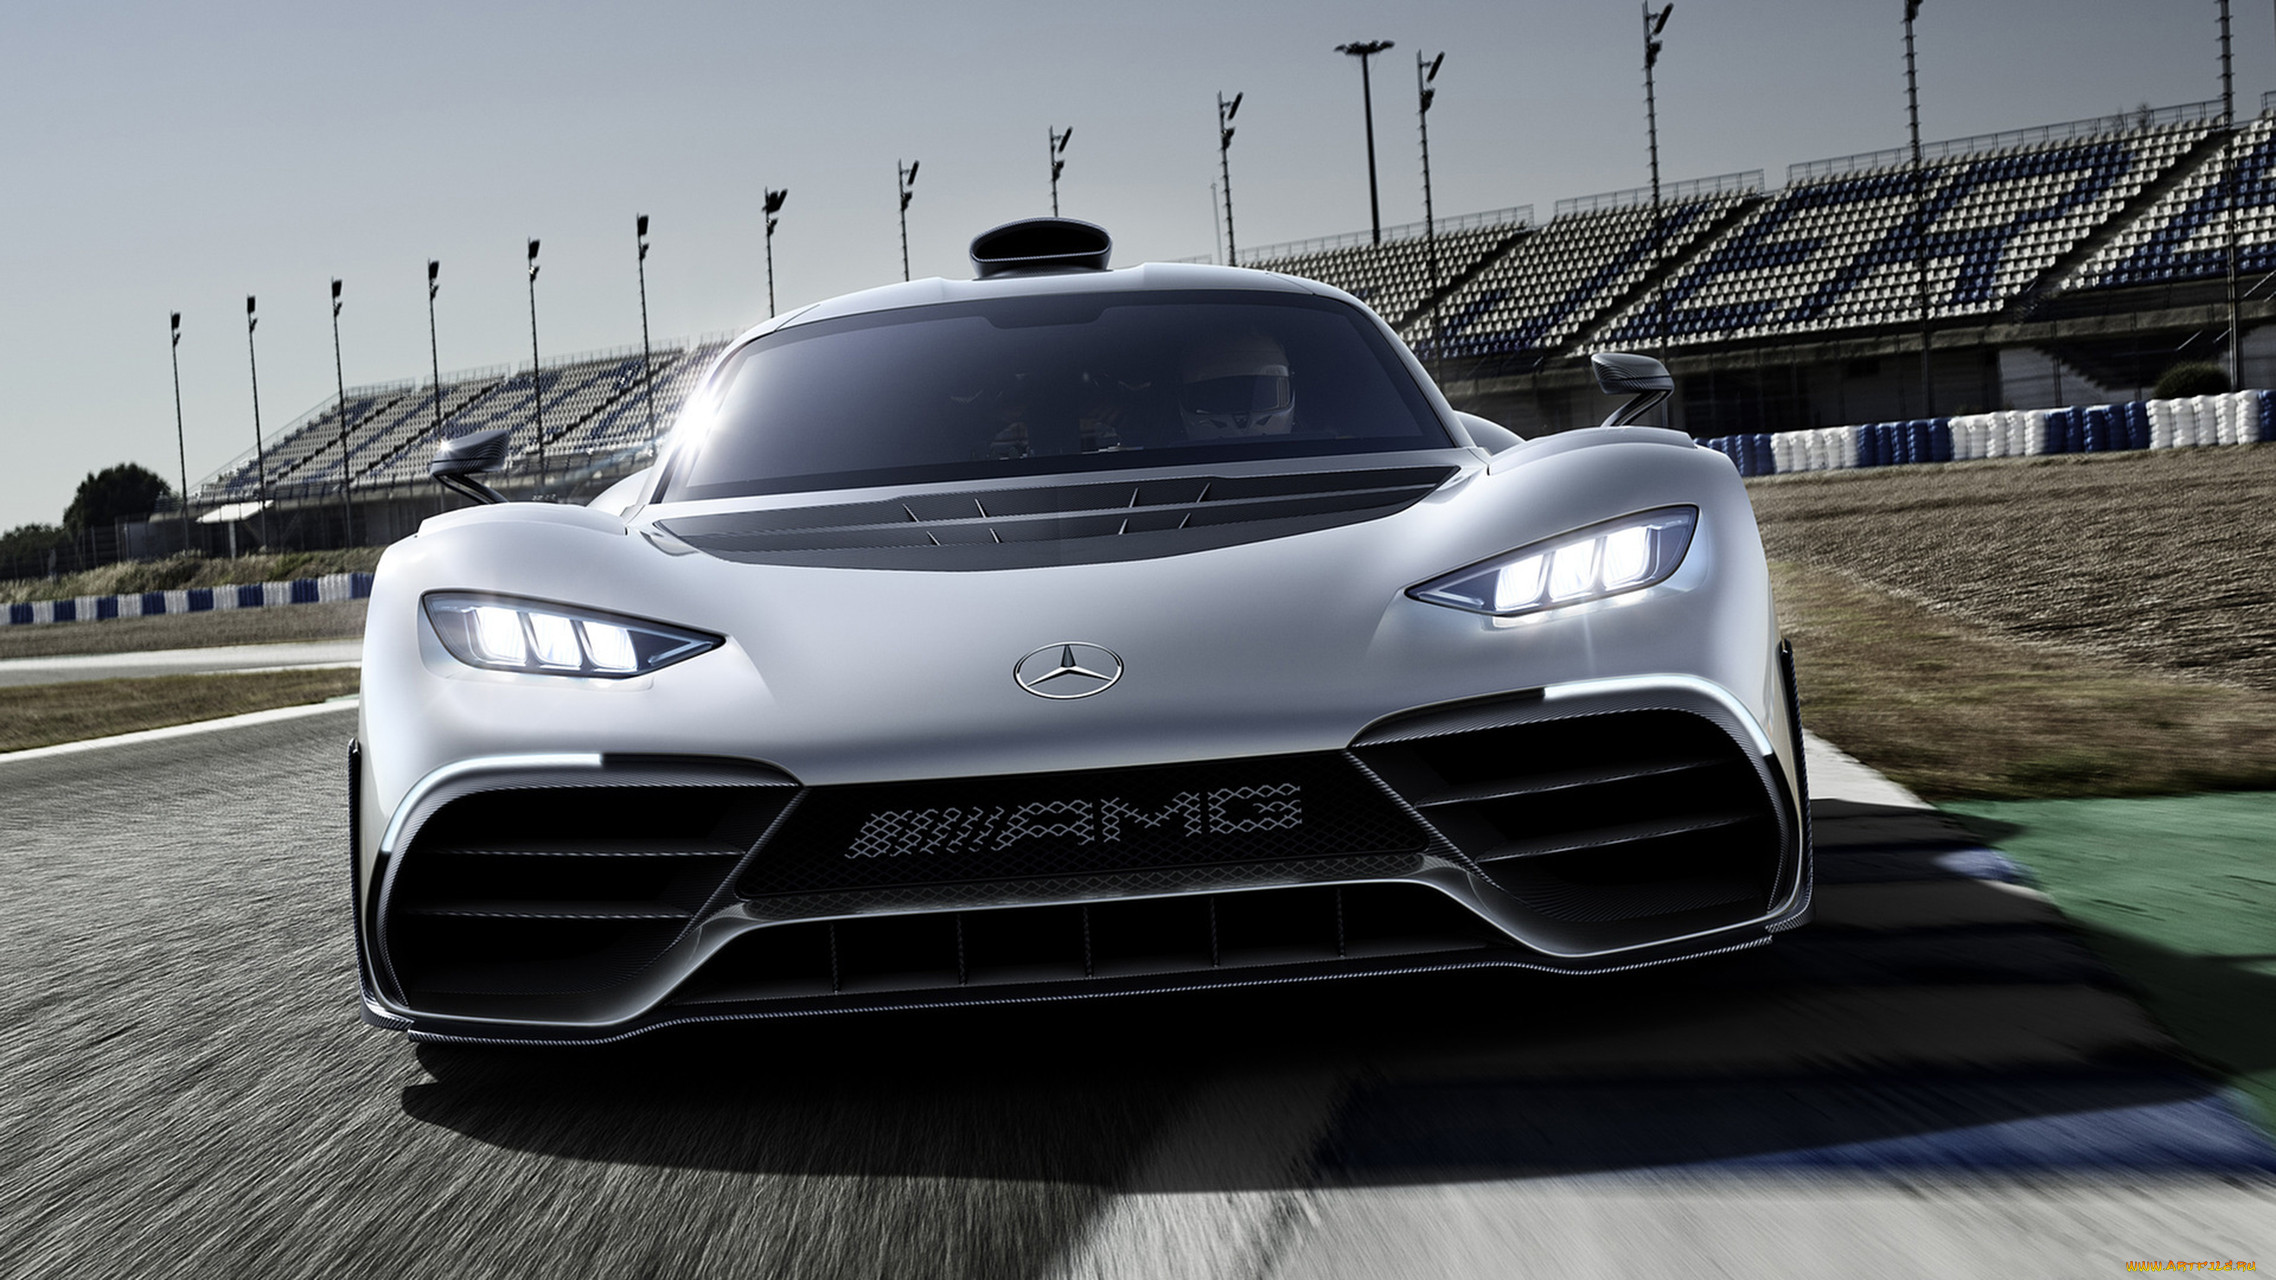 mercedes-benz amg project one 2017, , mercedes-benz, one, 2017, amg, project